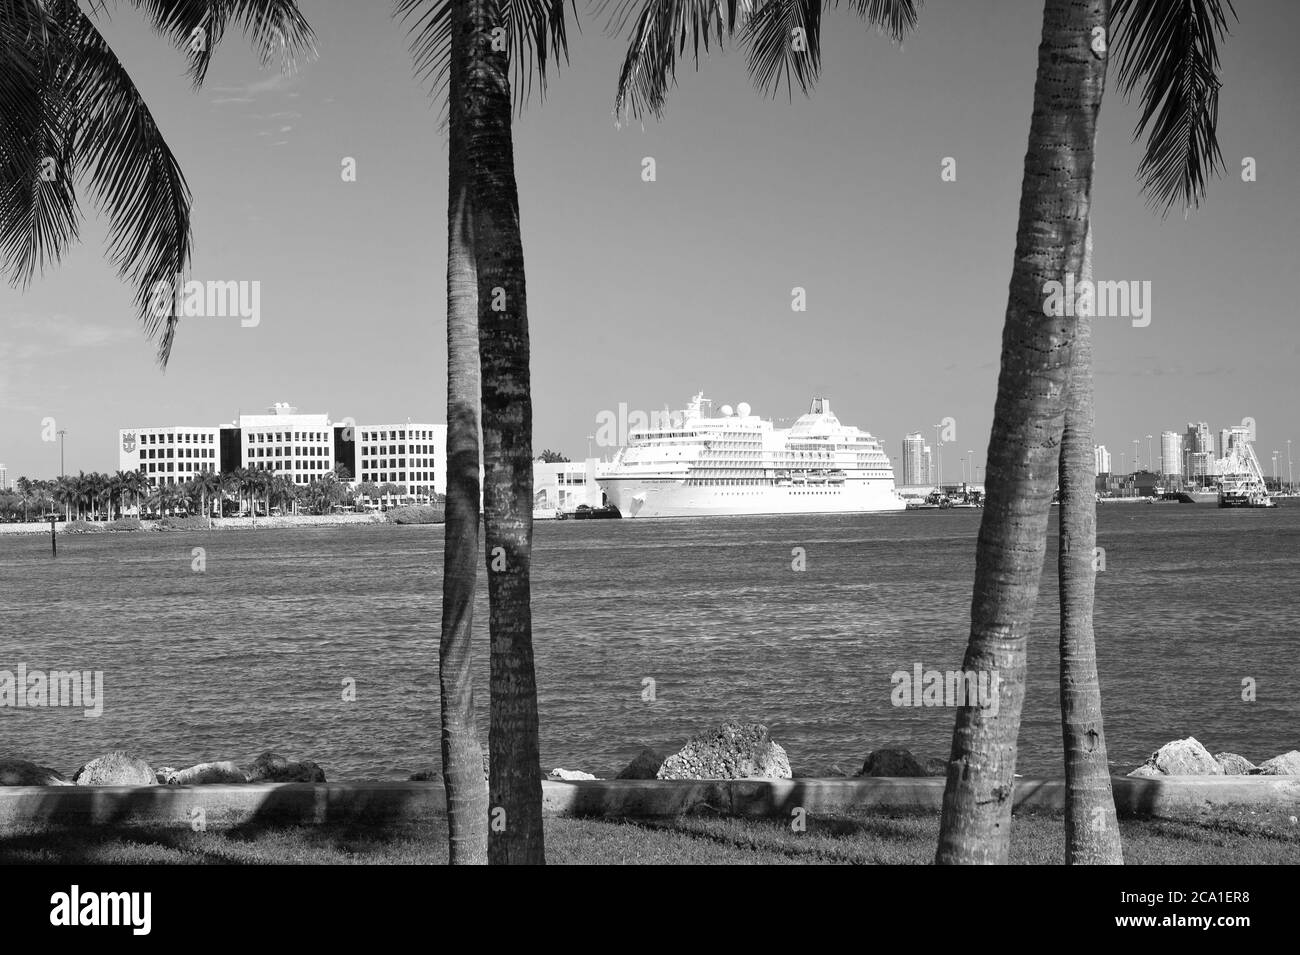 Miami, USA - February 29, 2016: Seven Seas Navigator on deep blue water and sky with palms foreground. Adventure and discovery. Travelling and travel. Journey and trip. Wanderlust. Summer vacation. Stock Photo